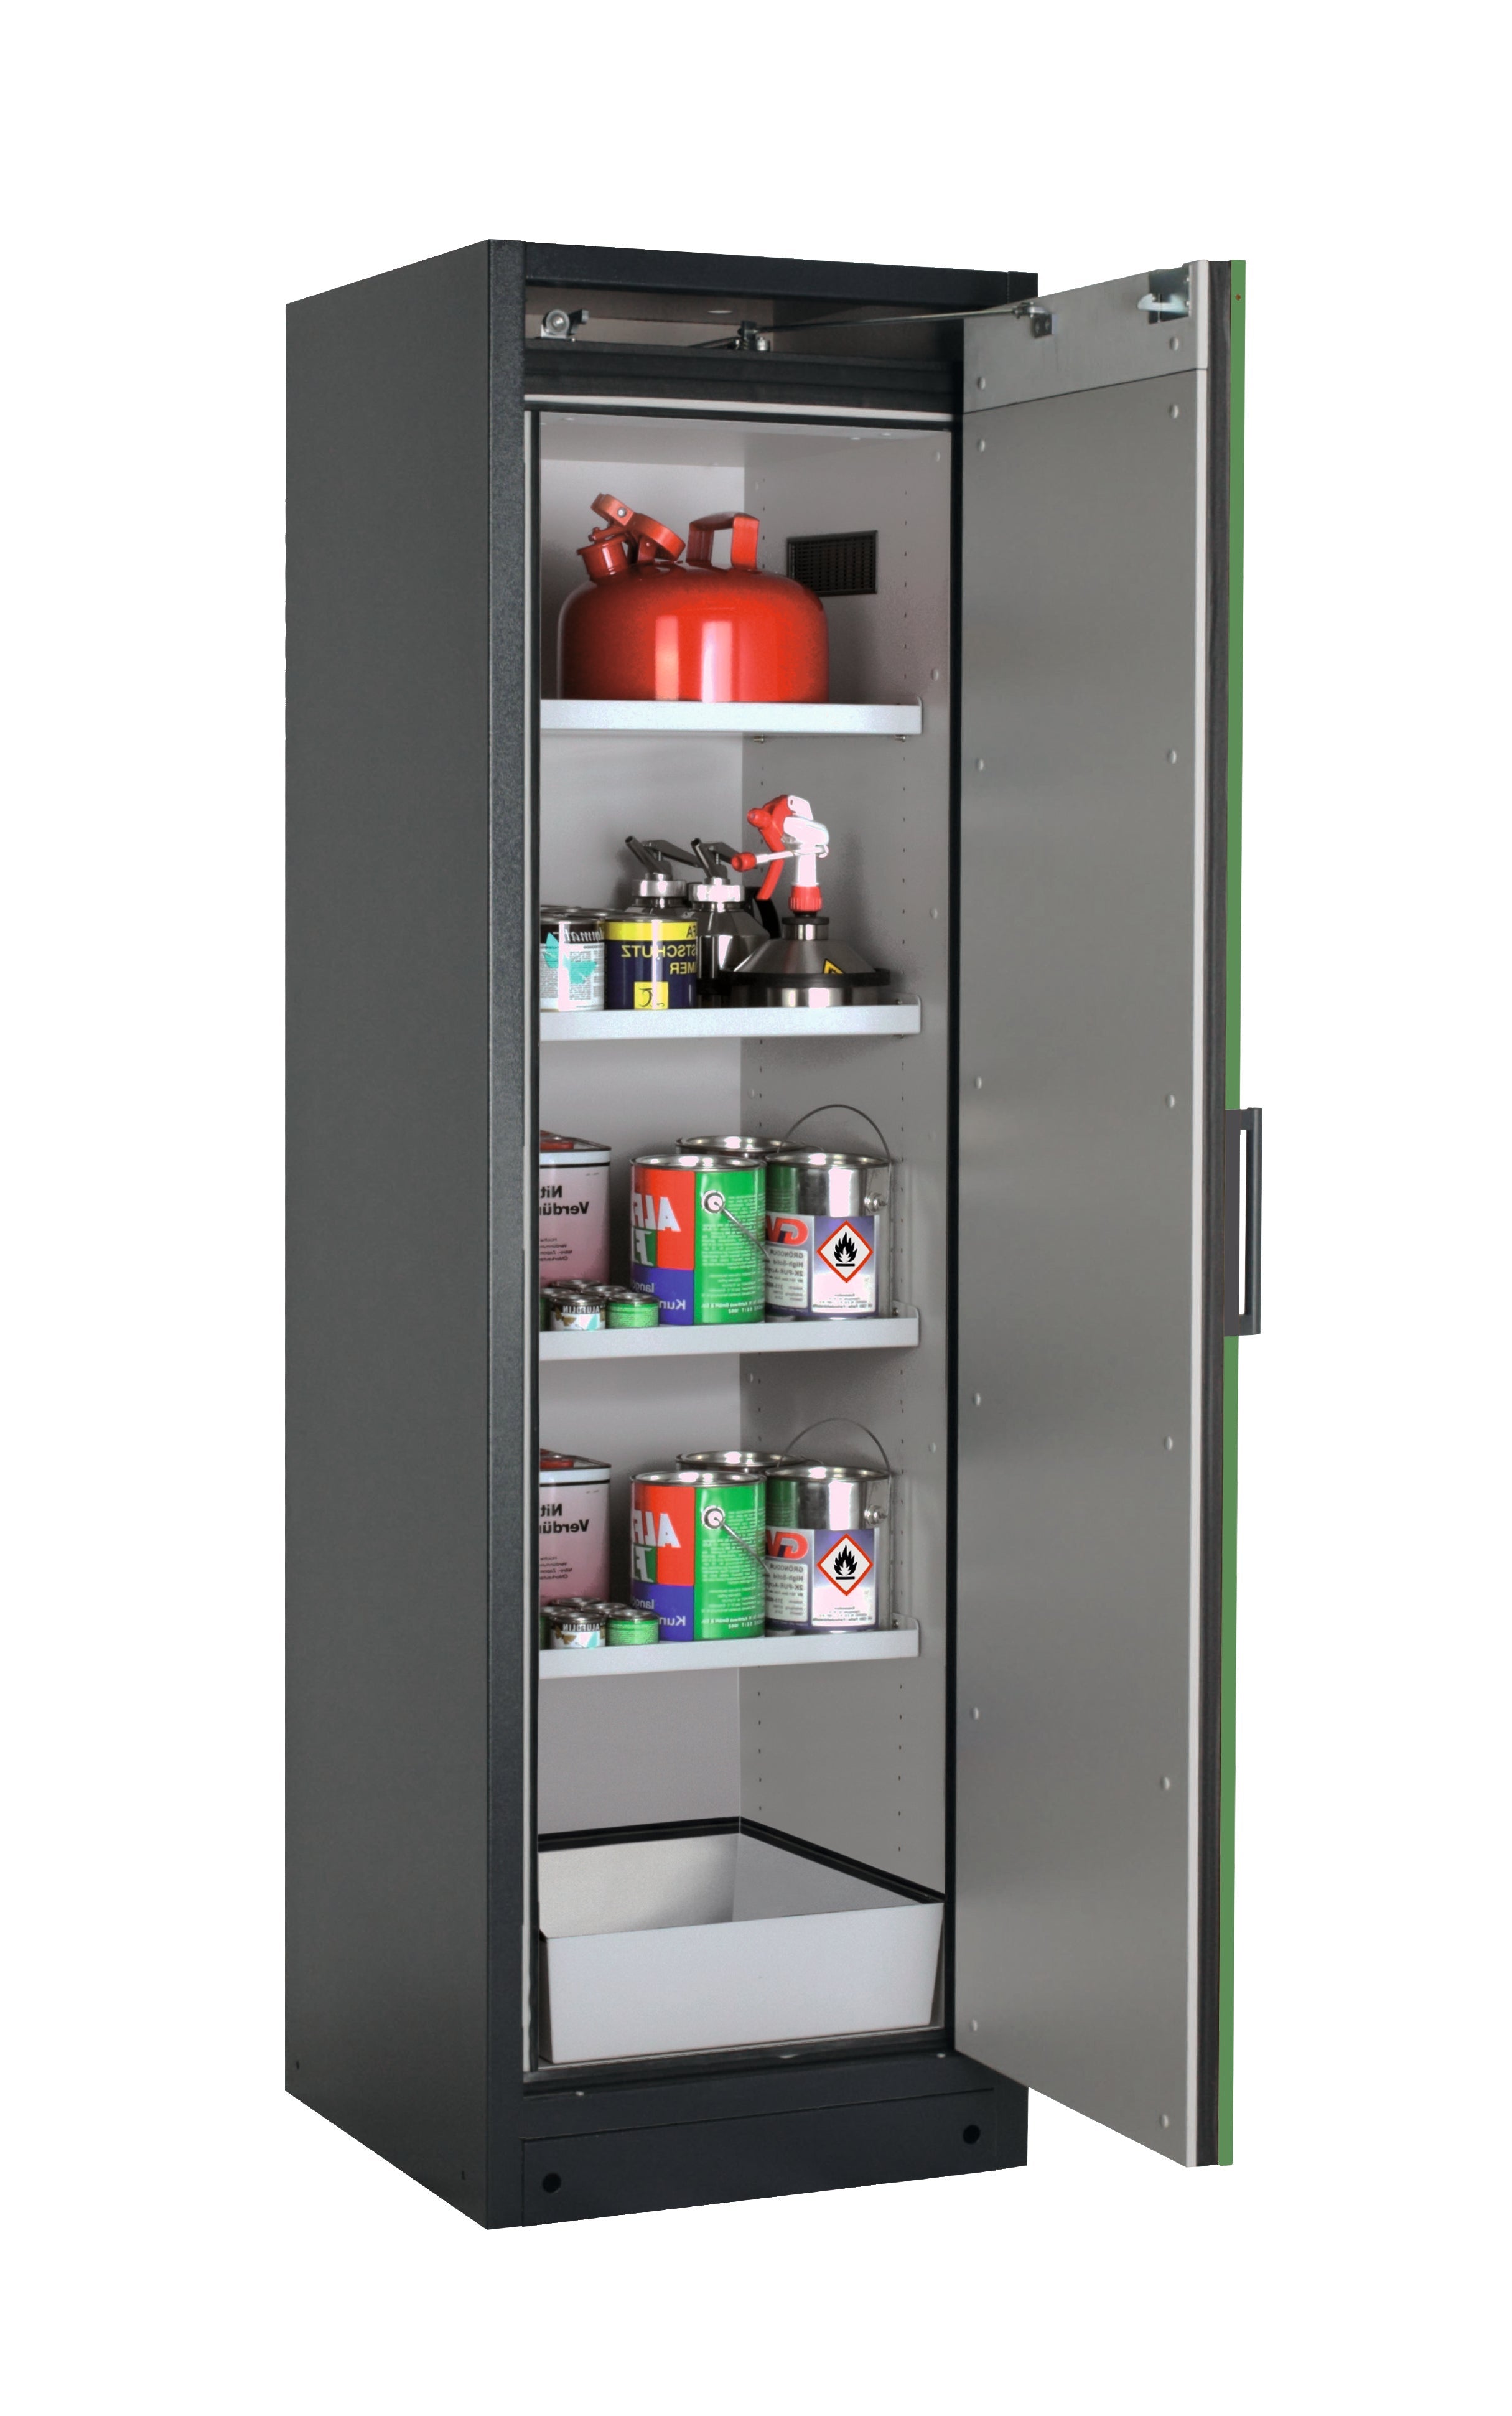 Type 90 safety storage cabinet Q-CLASSIC-90 model Q90.195.060.R in reseda green RAL 6011 with 4x shelf standard (sheet steel),